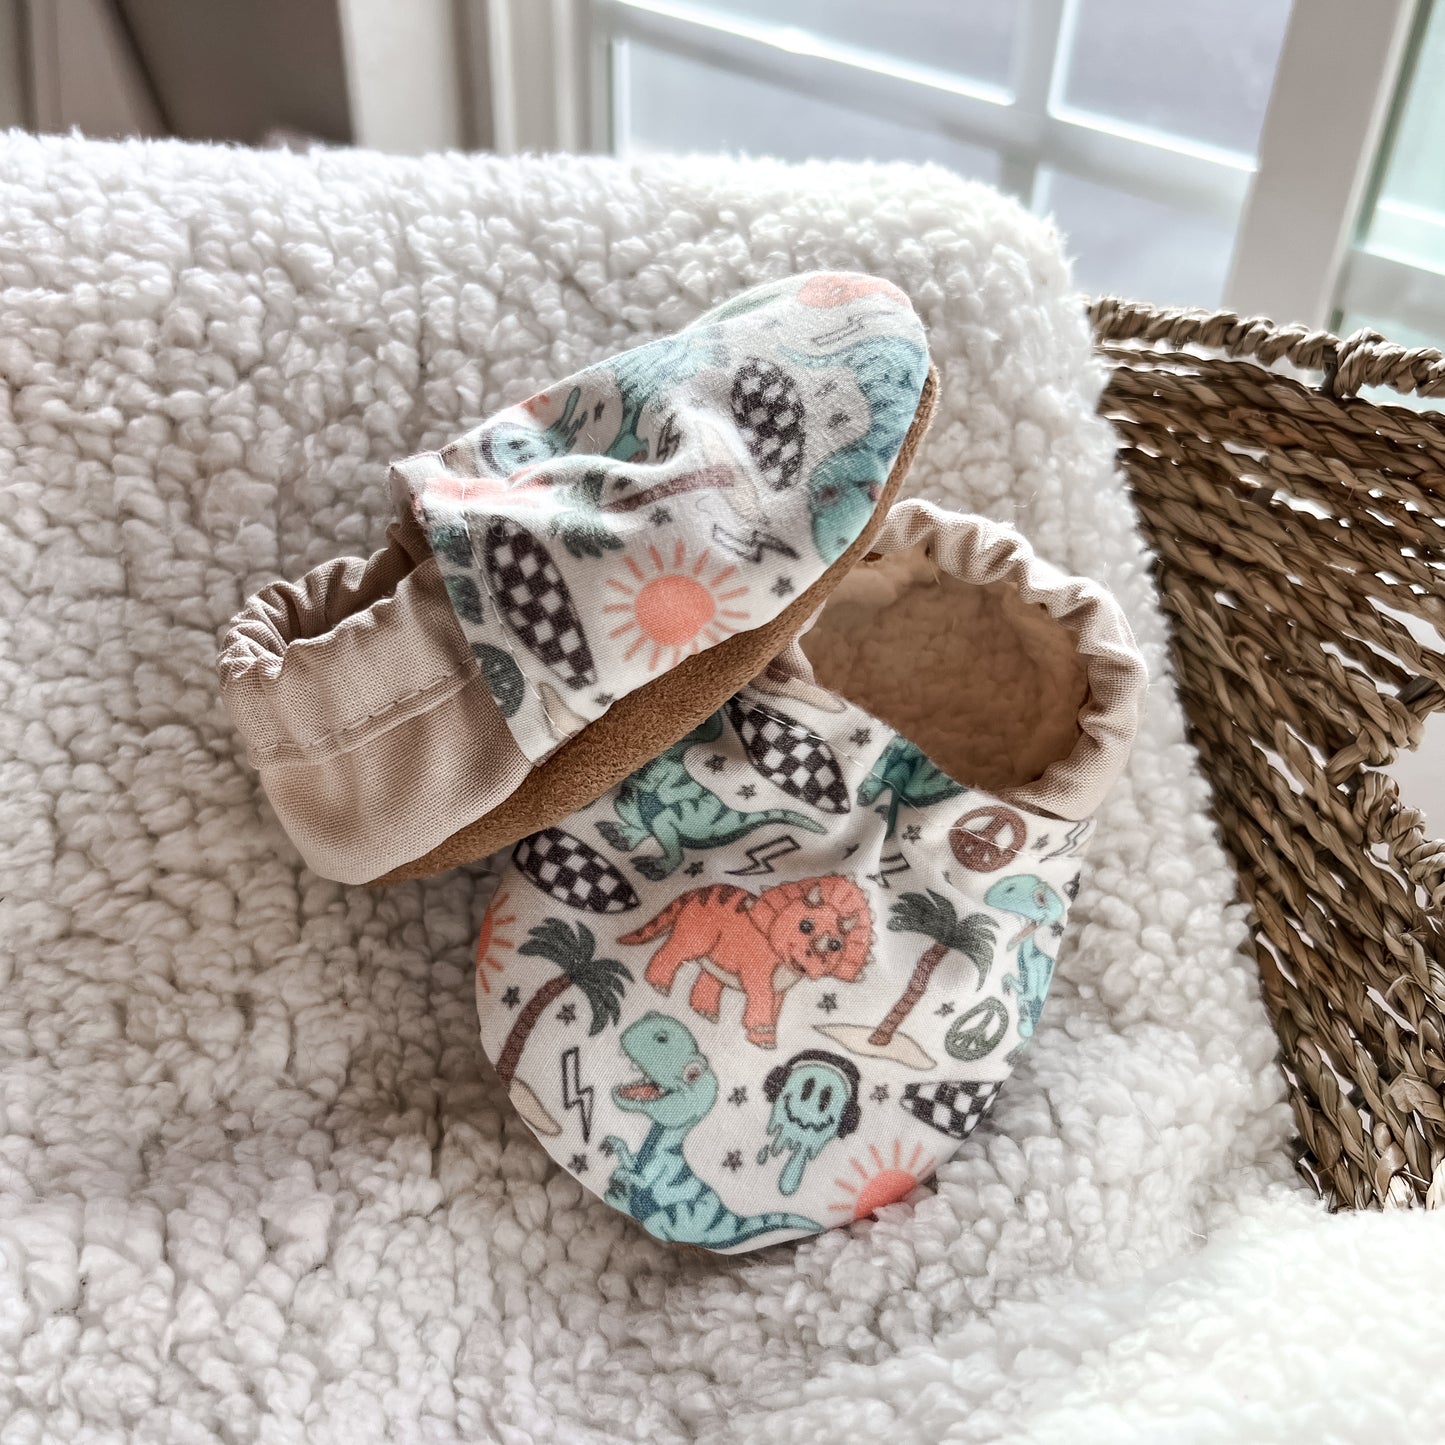 Skater Dino Baby Moccs, Baby Booties, Crib Shoes, Soft Sole Shoes, Barefoot Shoes, Baby Shoes, Moccasins, Trendy Baby, Baby Gift